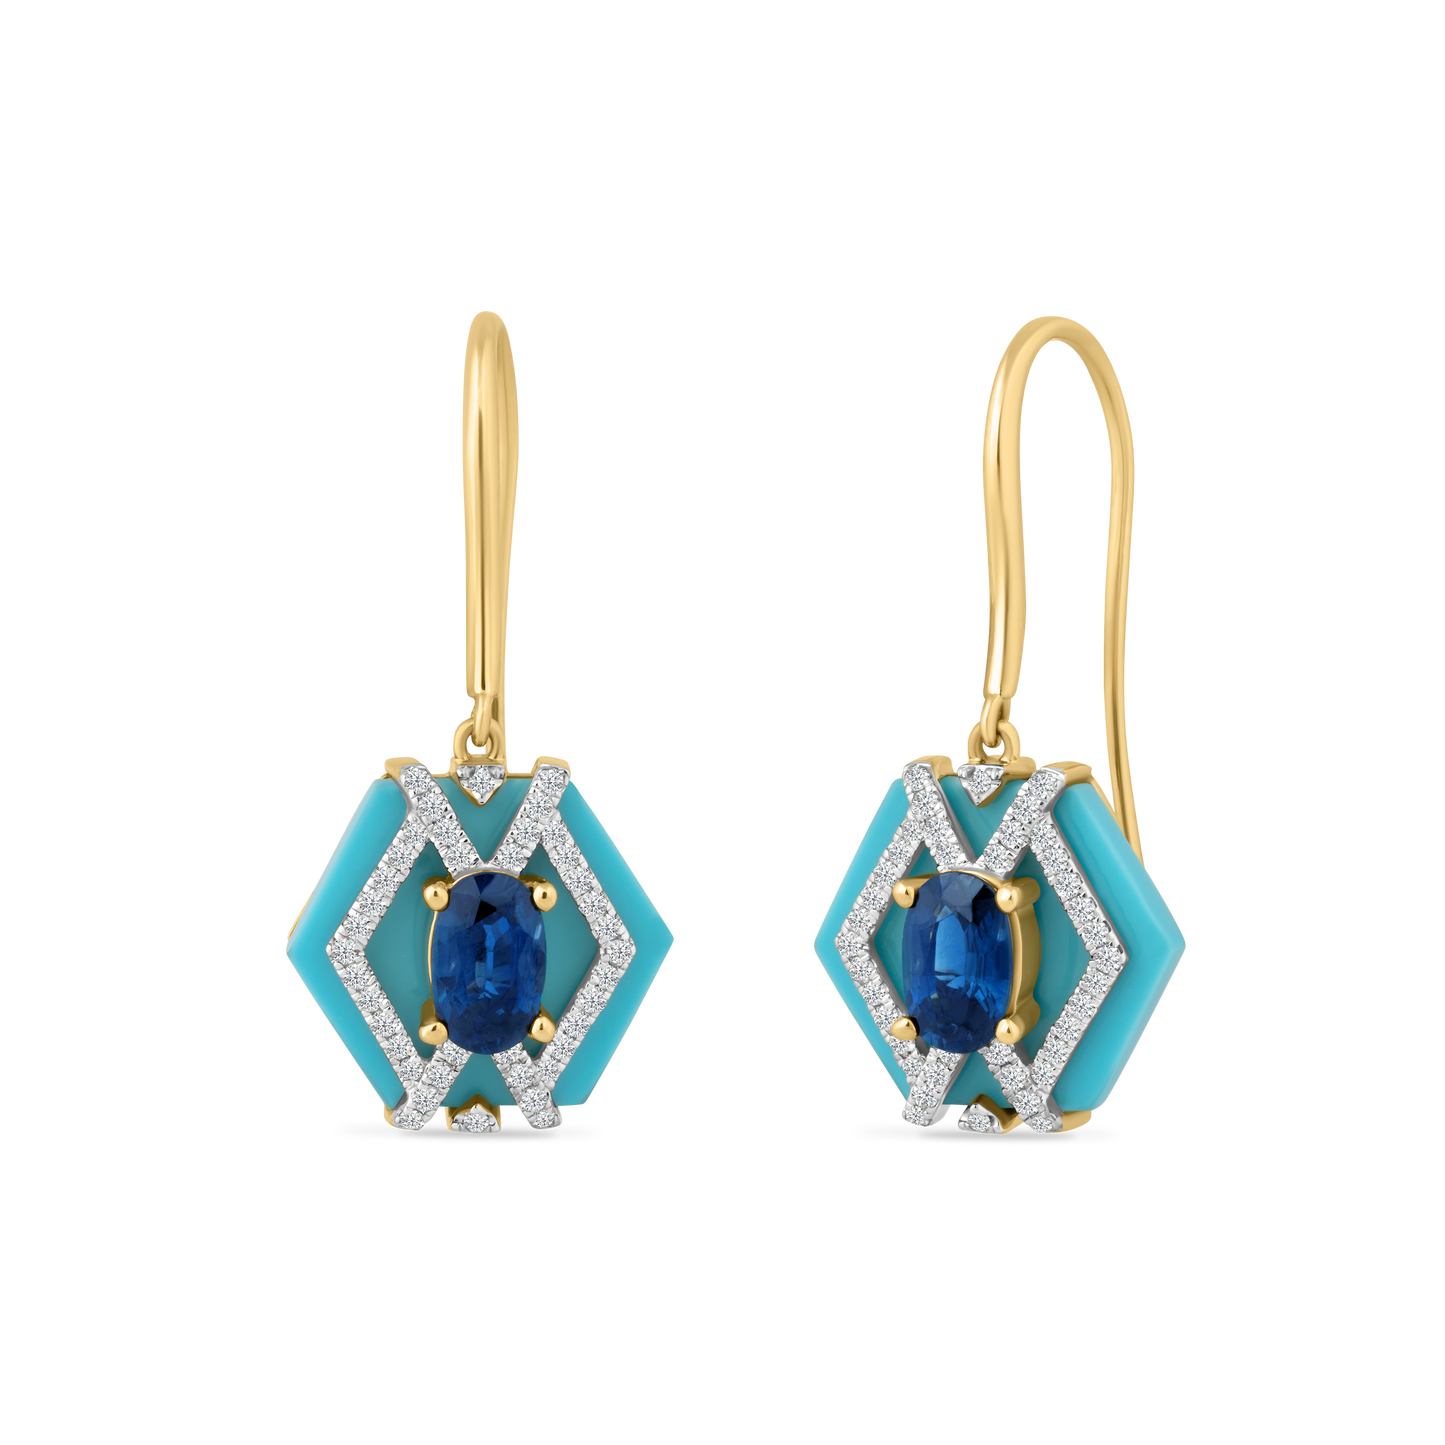 14K RECON TURQUOISE WIRE EARRINGS WITH 80 DIAMONDS 0.27CT AND 2 SAPPHIRES 1.2CT